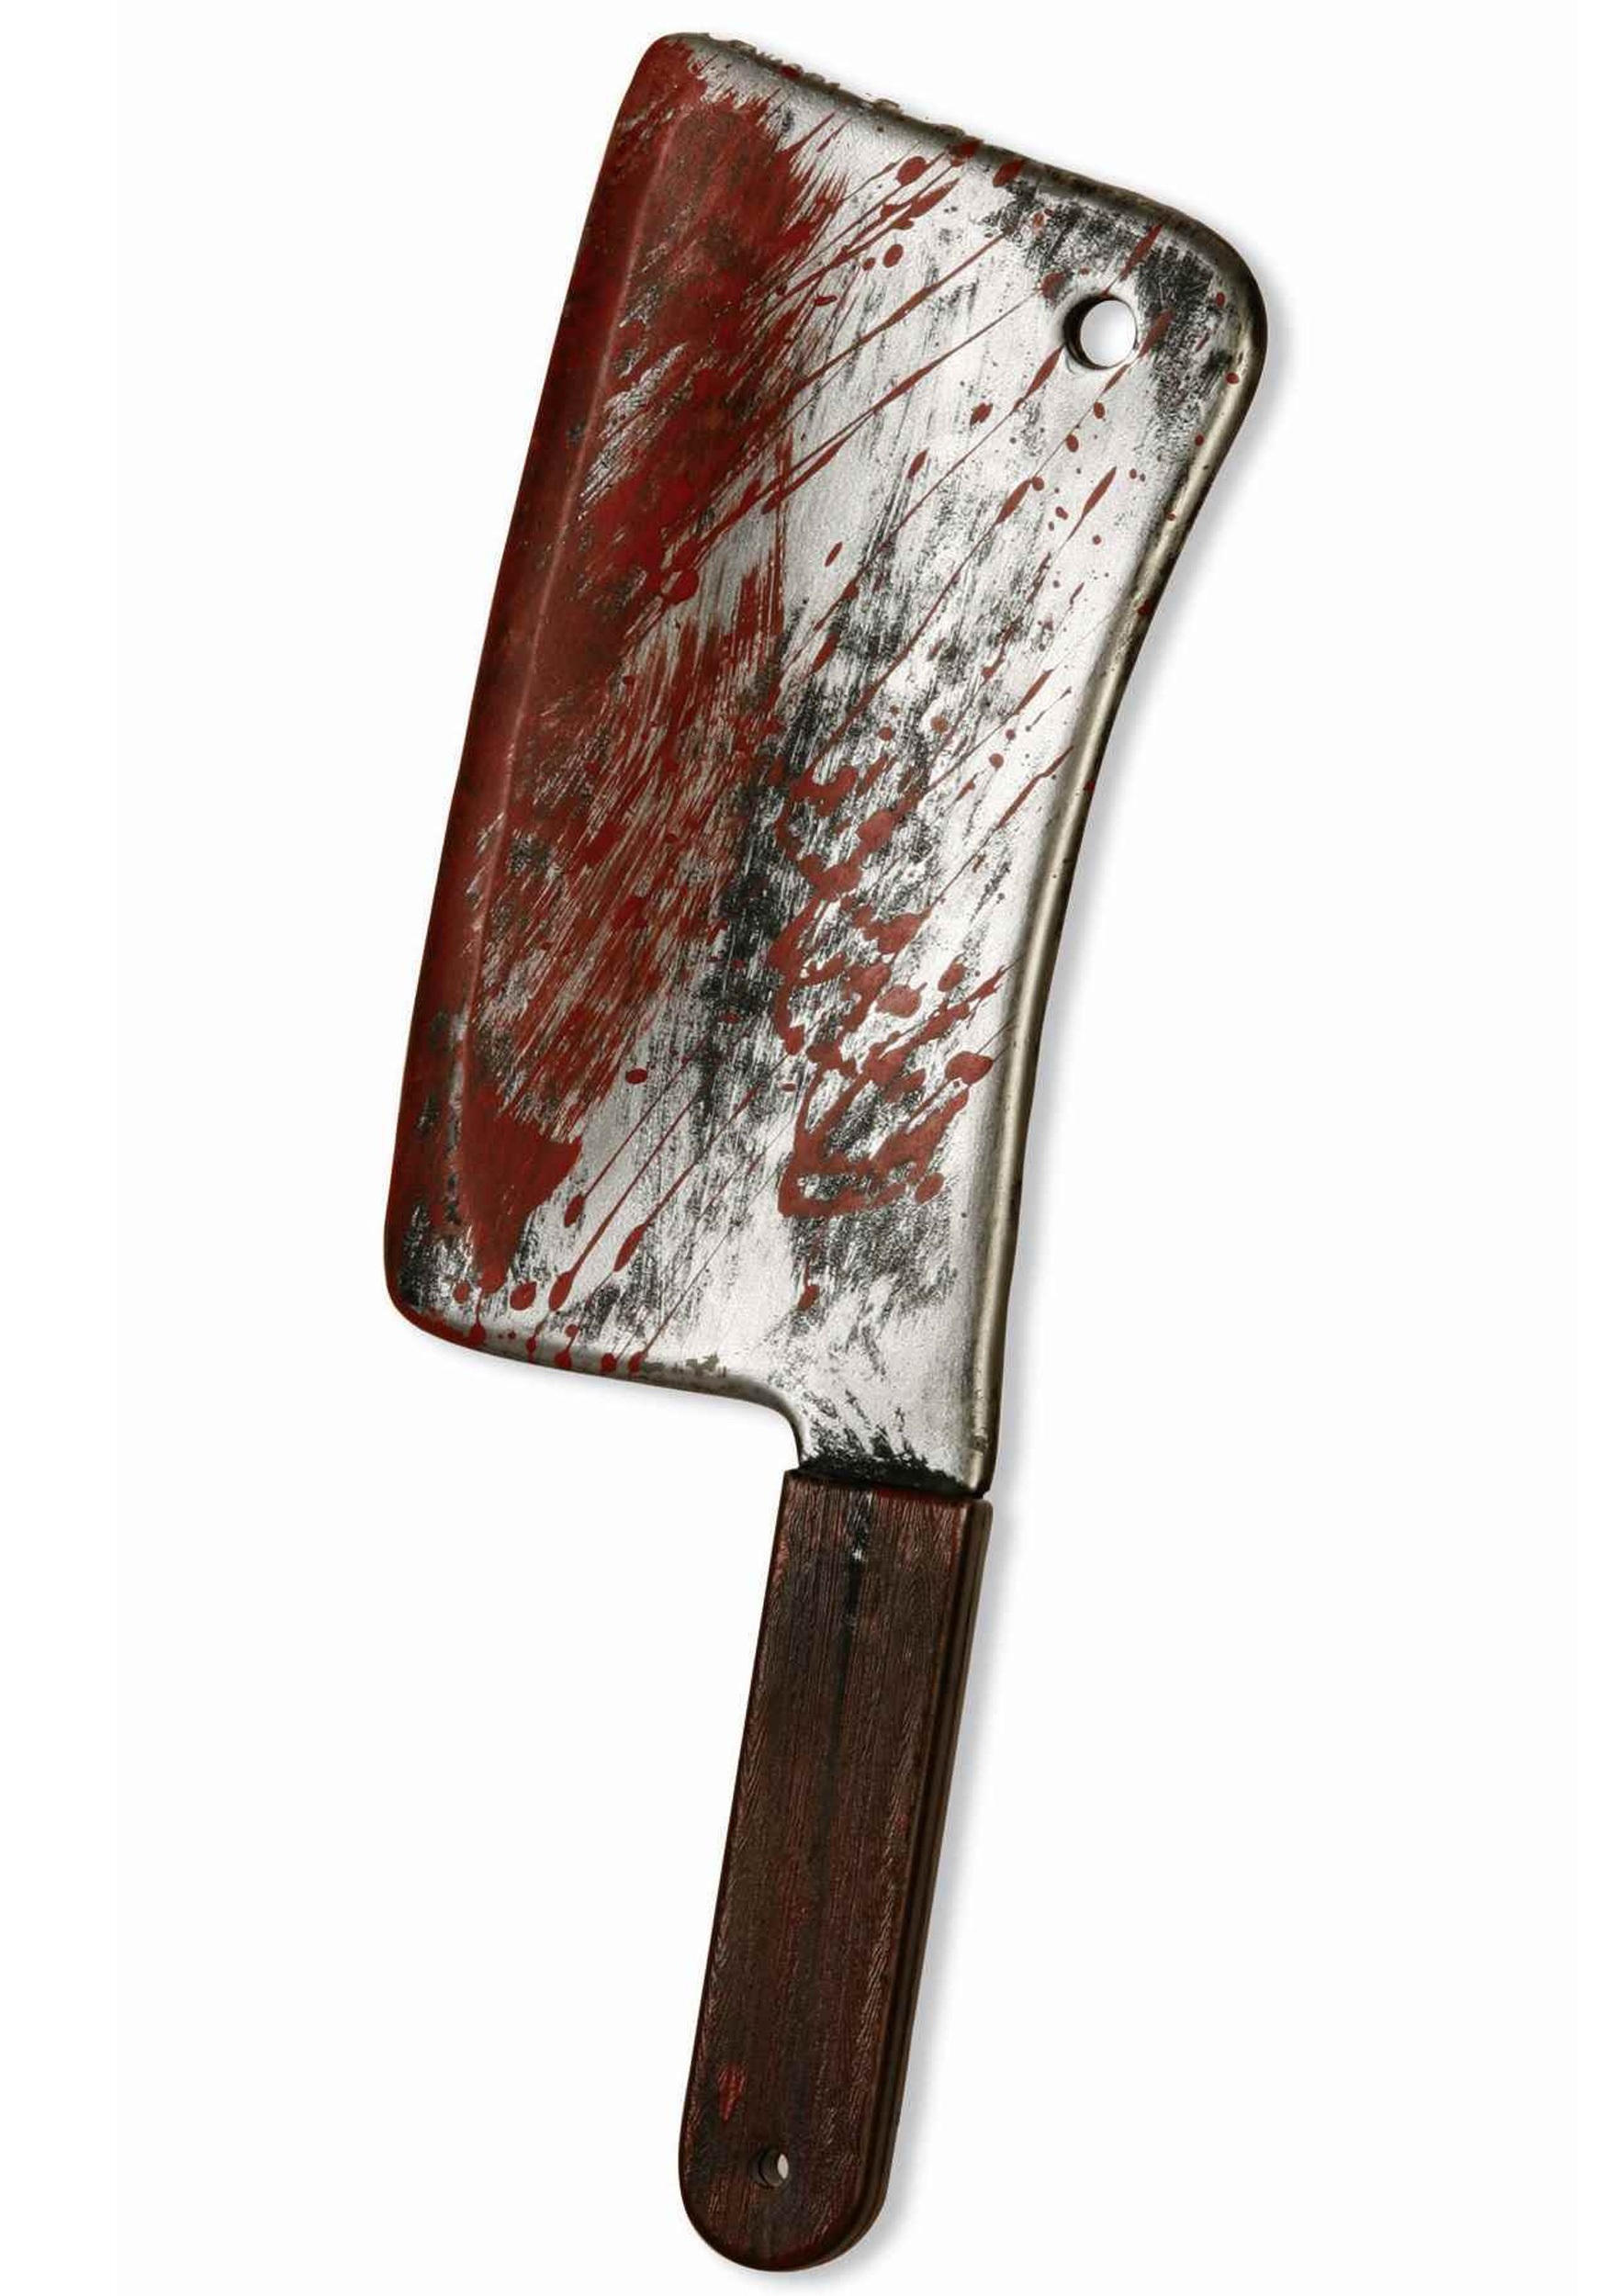 Cleaver Covered in Blood